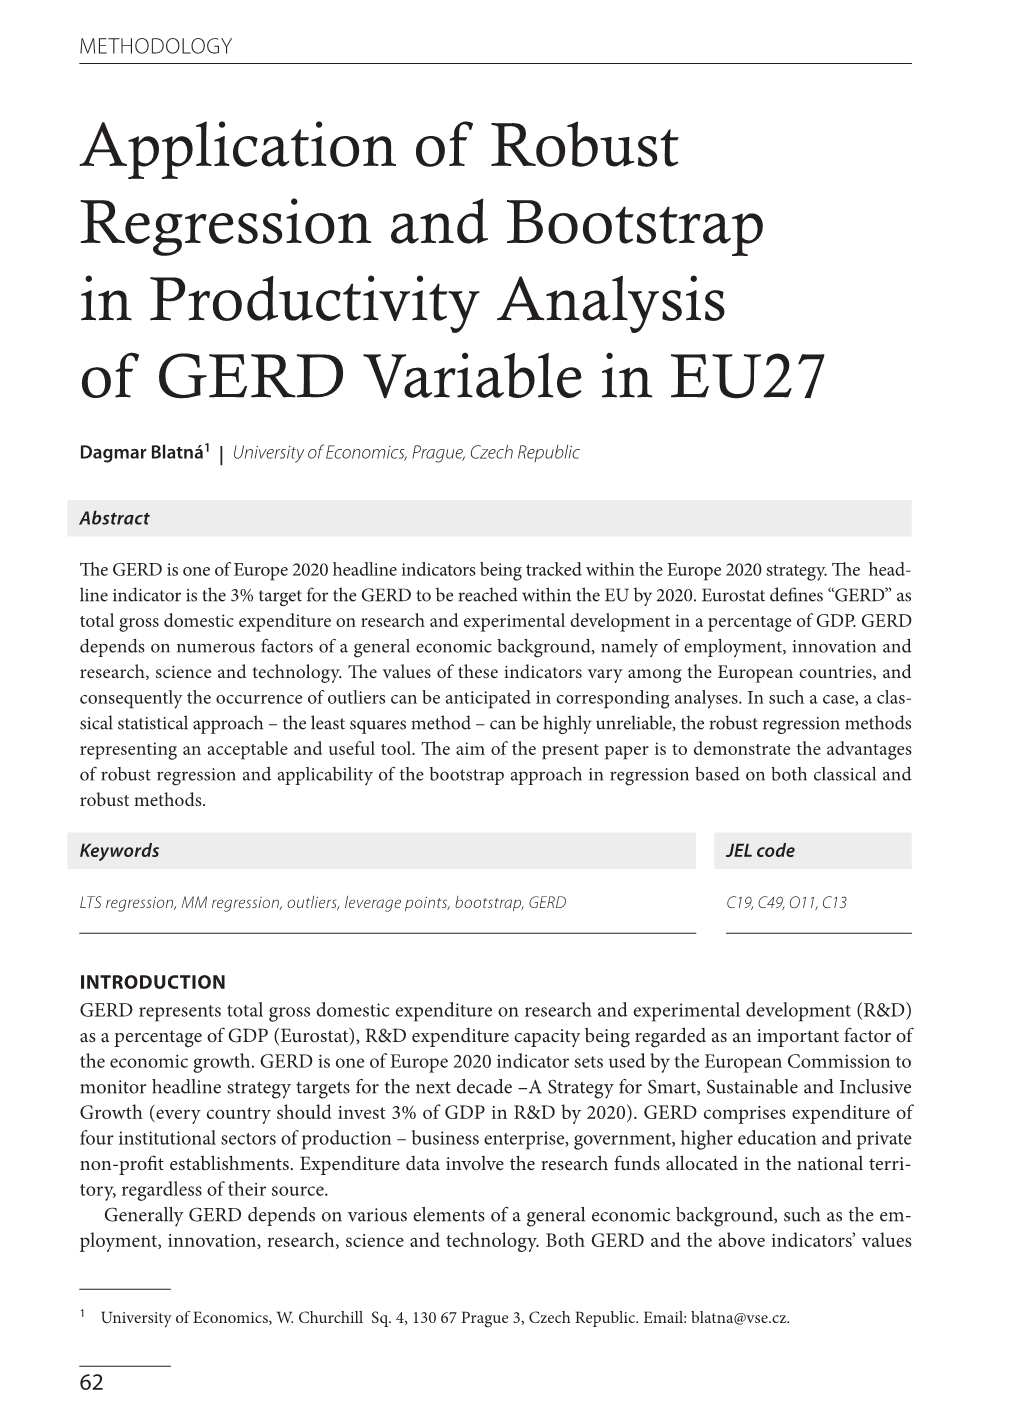 Application of Robust Regression and Bootstrap in Productivity Analysis of GERD Variable in EU27